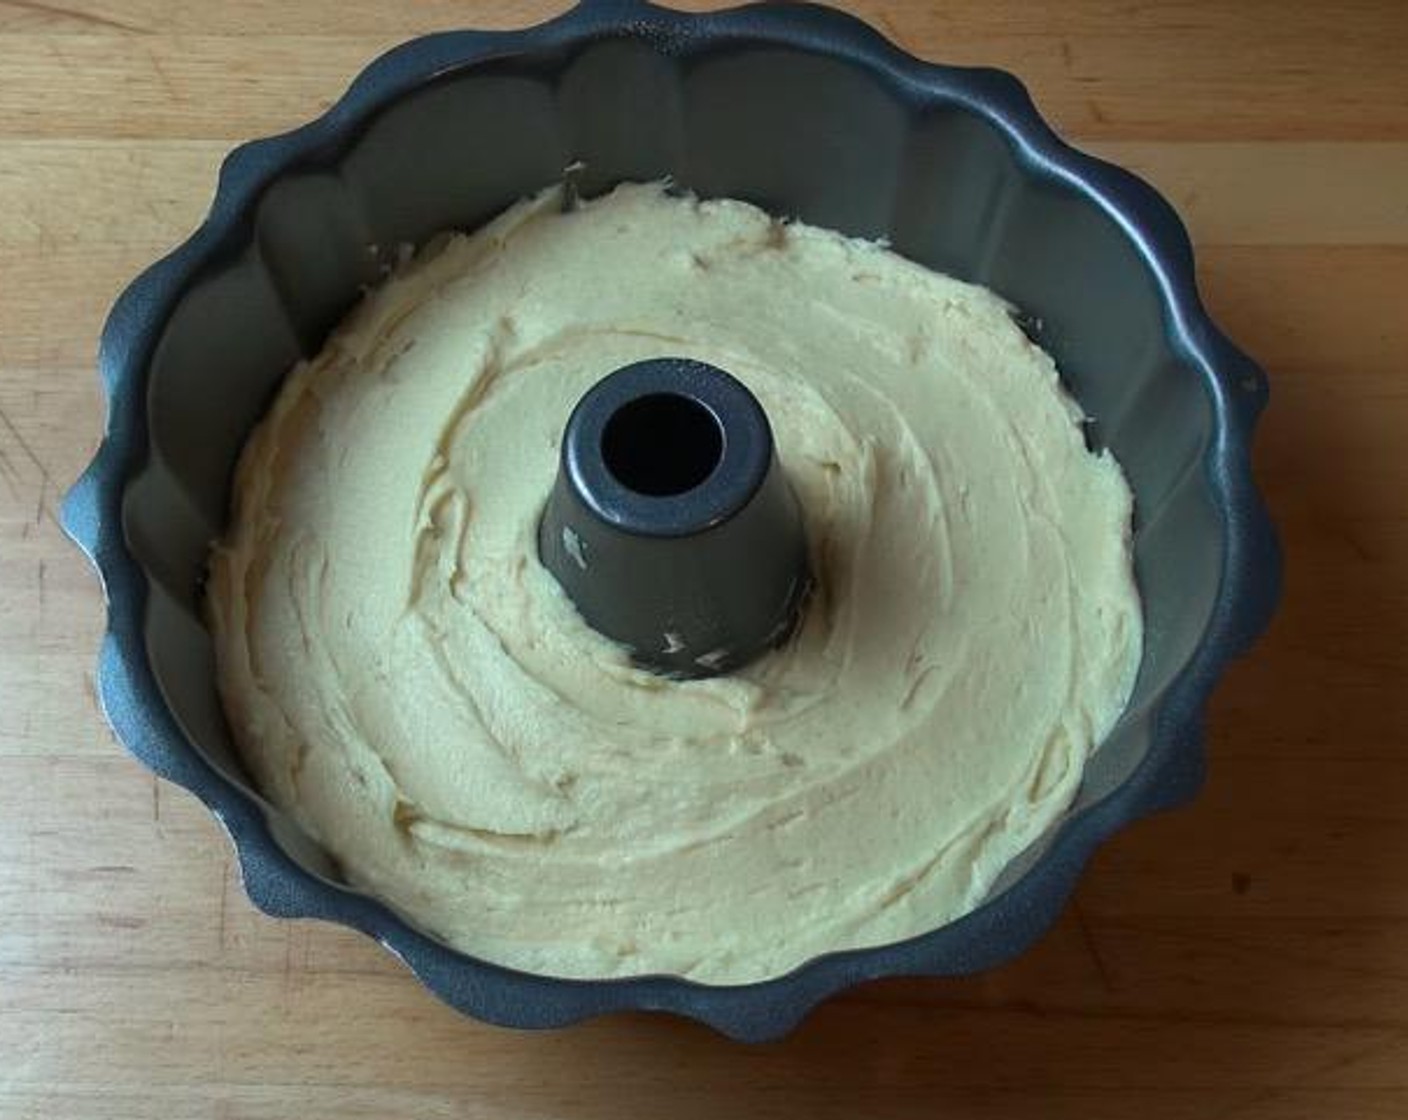 step 4 Transfer the batter into a lightly greased fluted bundt pan. Smooth the surface until even.